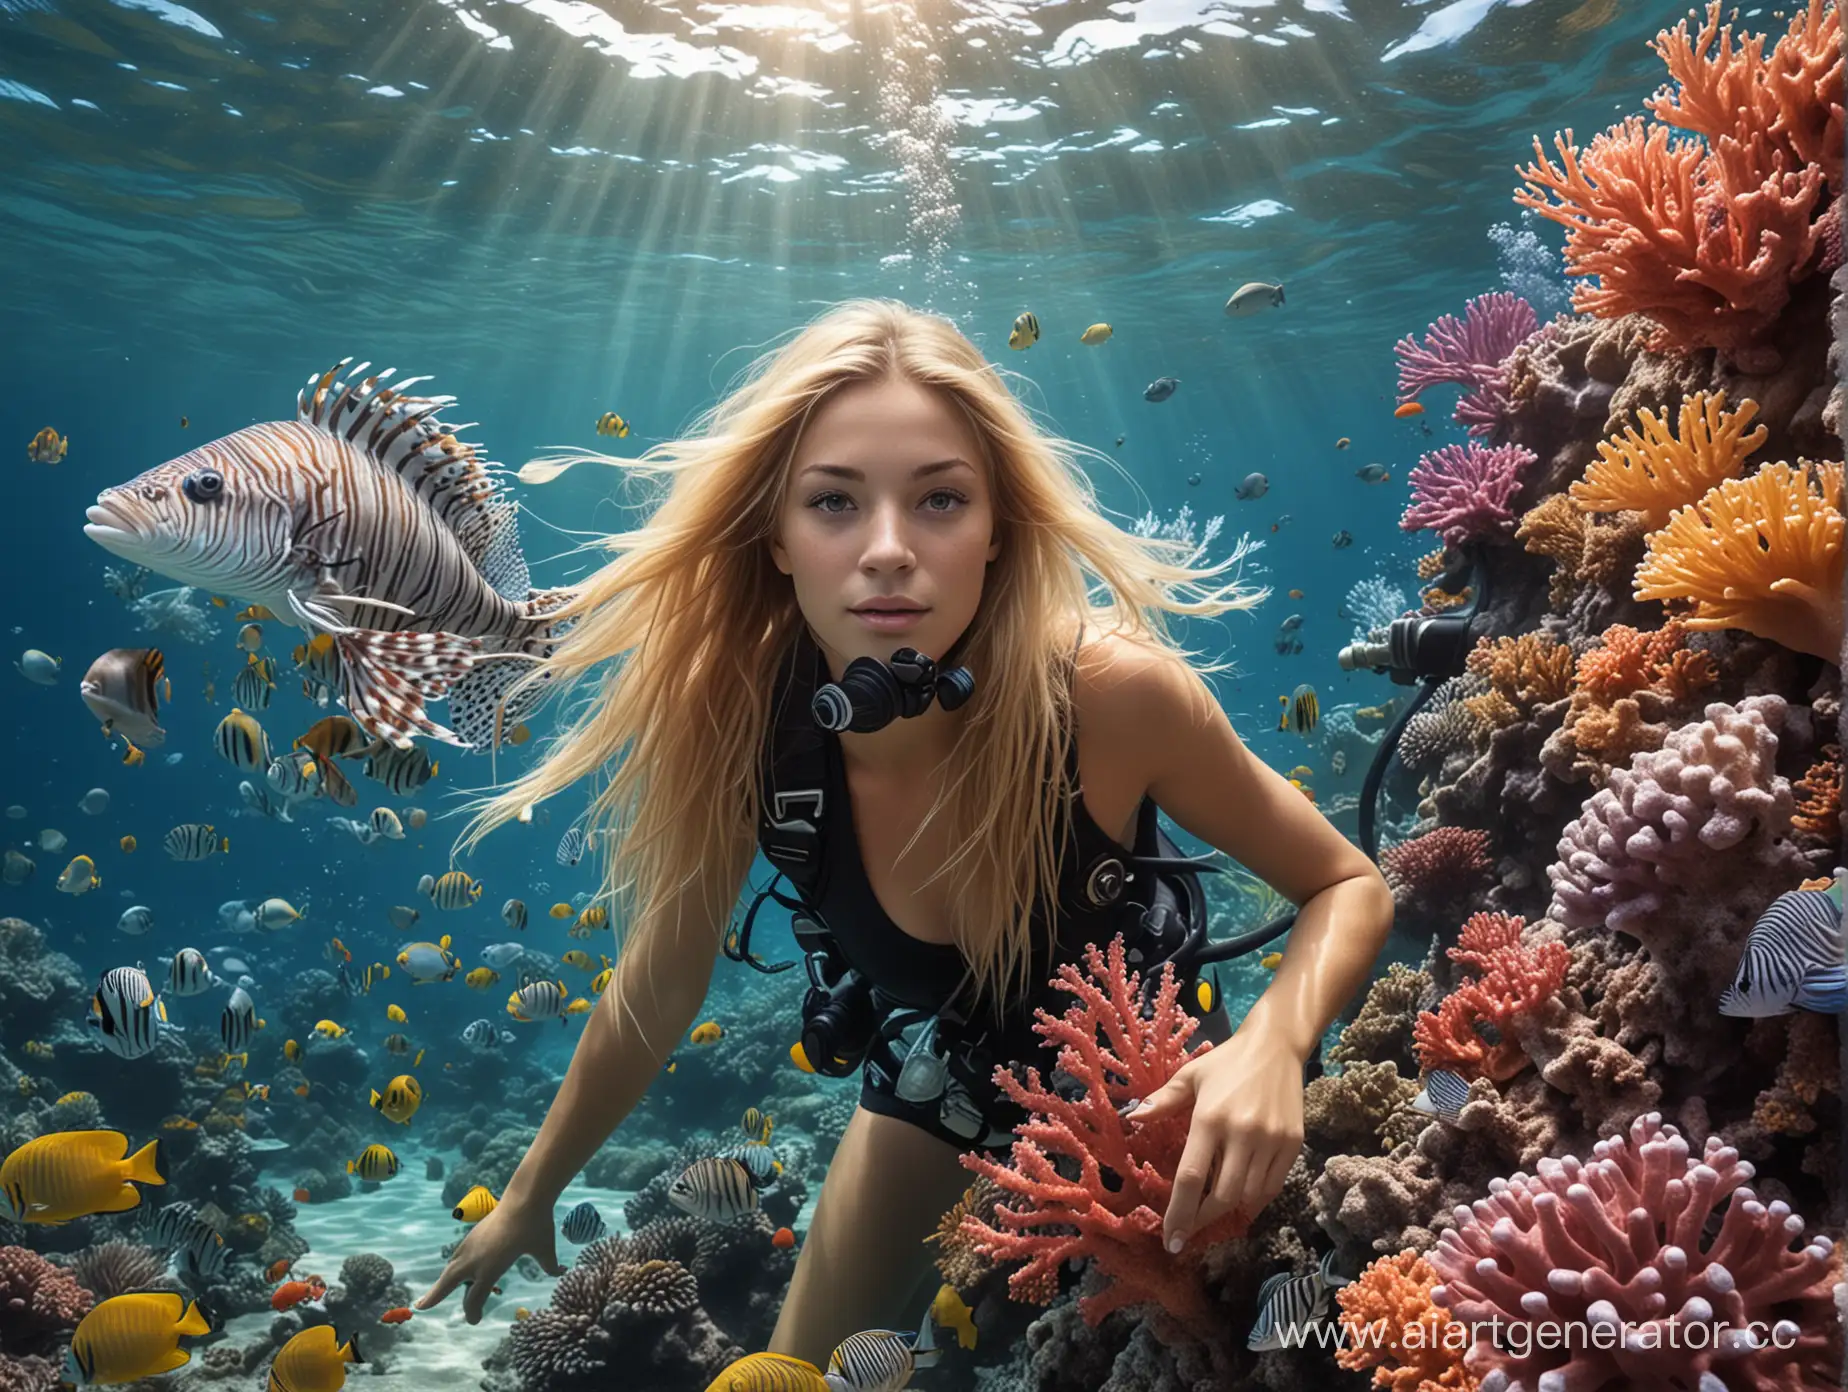 Ocean-Scuba-Diver-with-Blonde-Hair-Amid-Colorful-Reef-and-Marine-Life